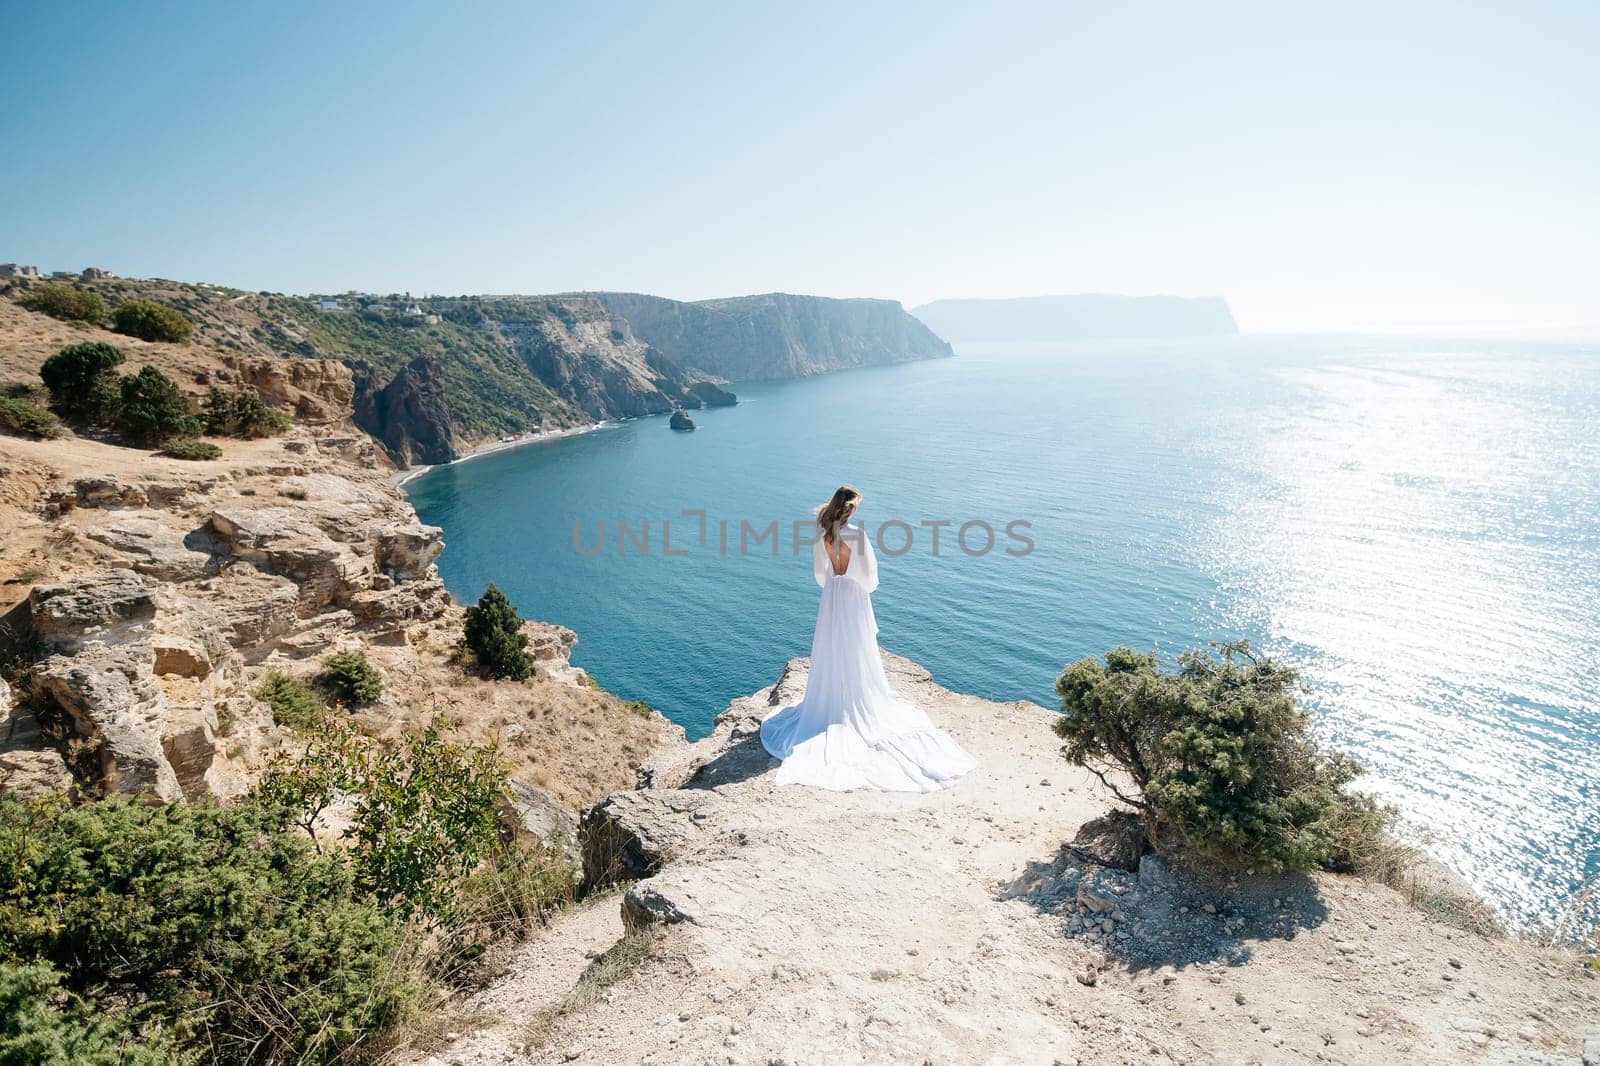 woman white dress stands on a rocky cliff overlooking the ocean. The scene is serene and peaceful, with the woman's dress billowing in the wind